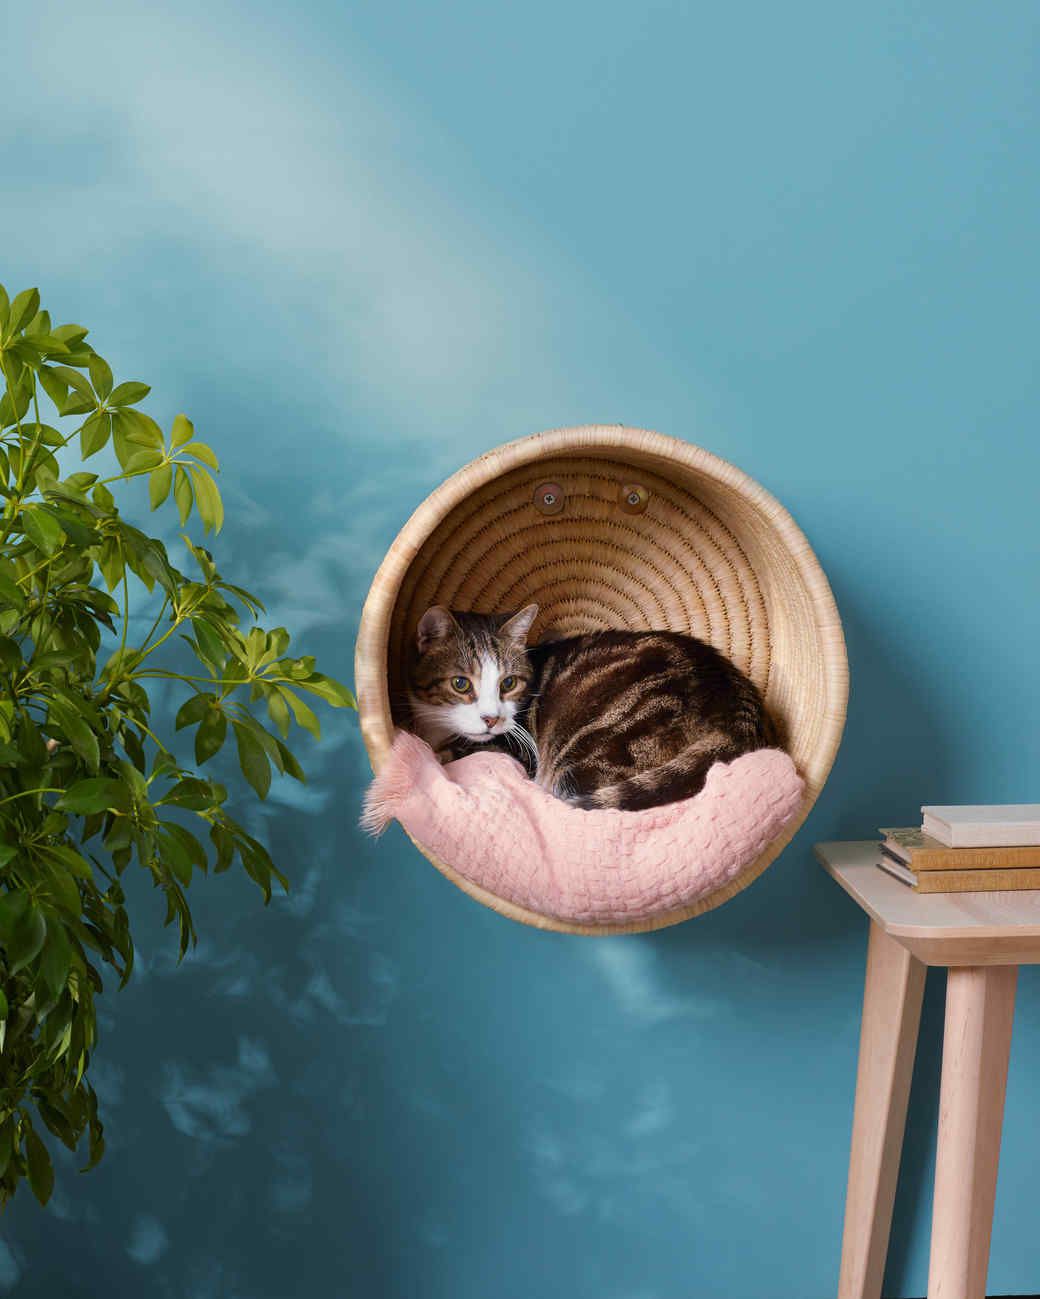 hanging cat basket with white and gray cat inside